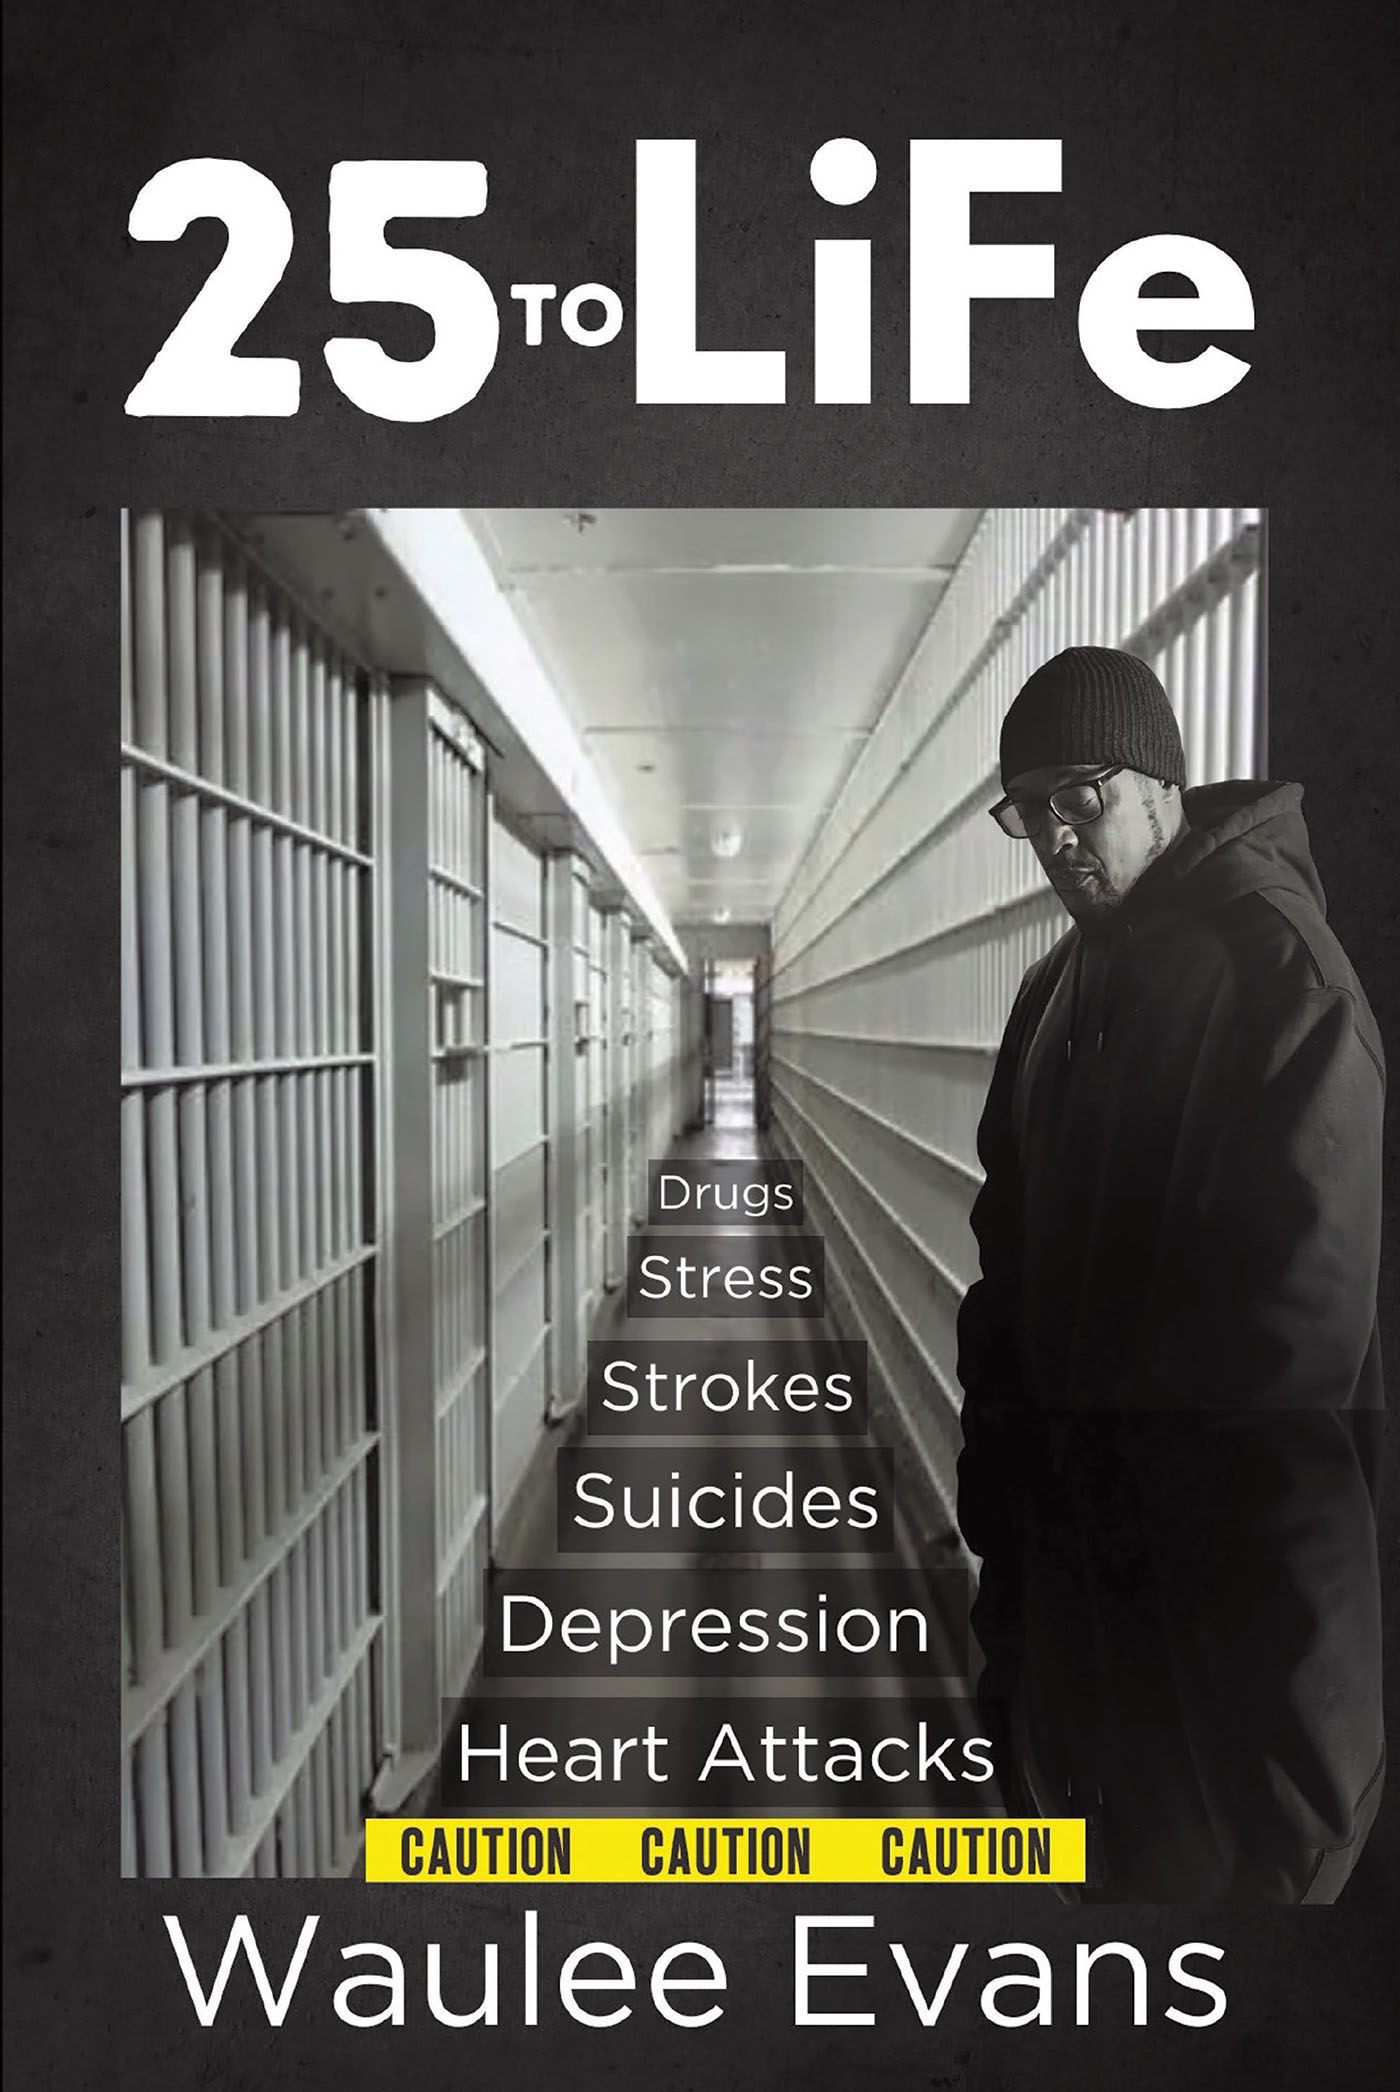 Author Waulee Evans’ New Book, "25 To Life," is the Experiences of a Former Corrections Officer and How He Viewed It